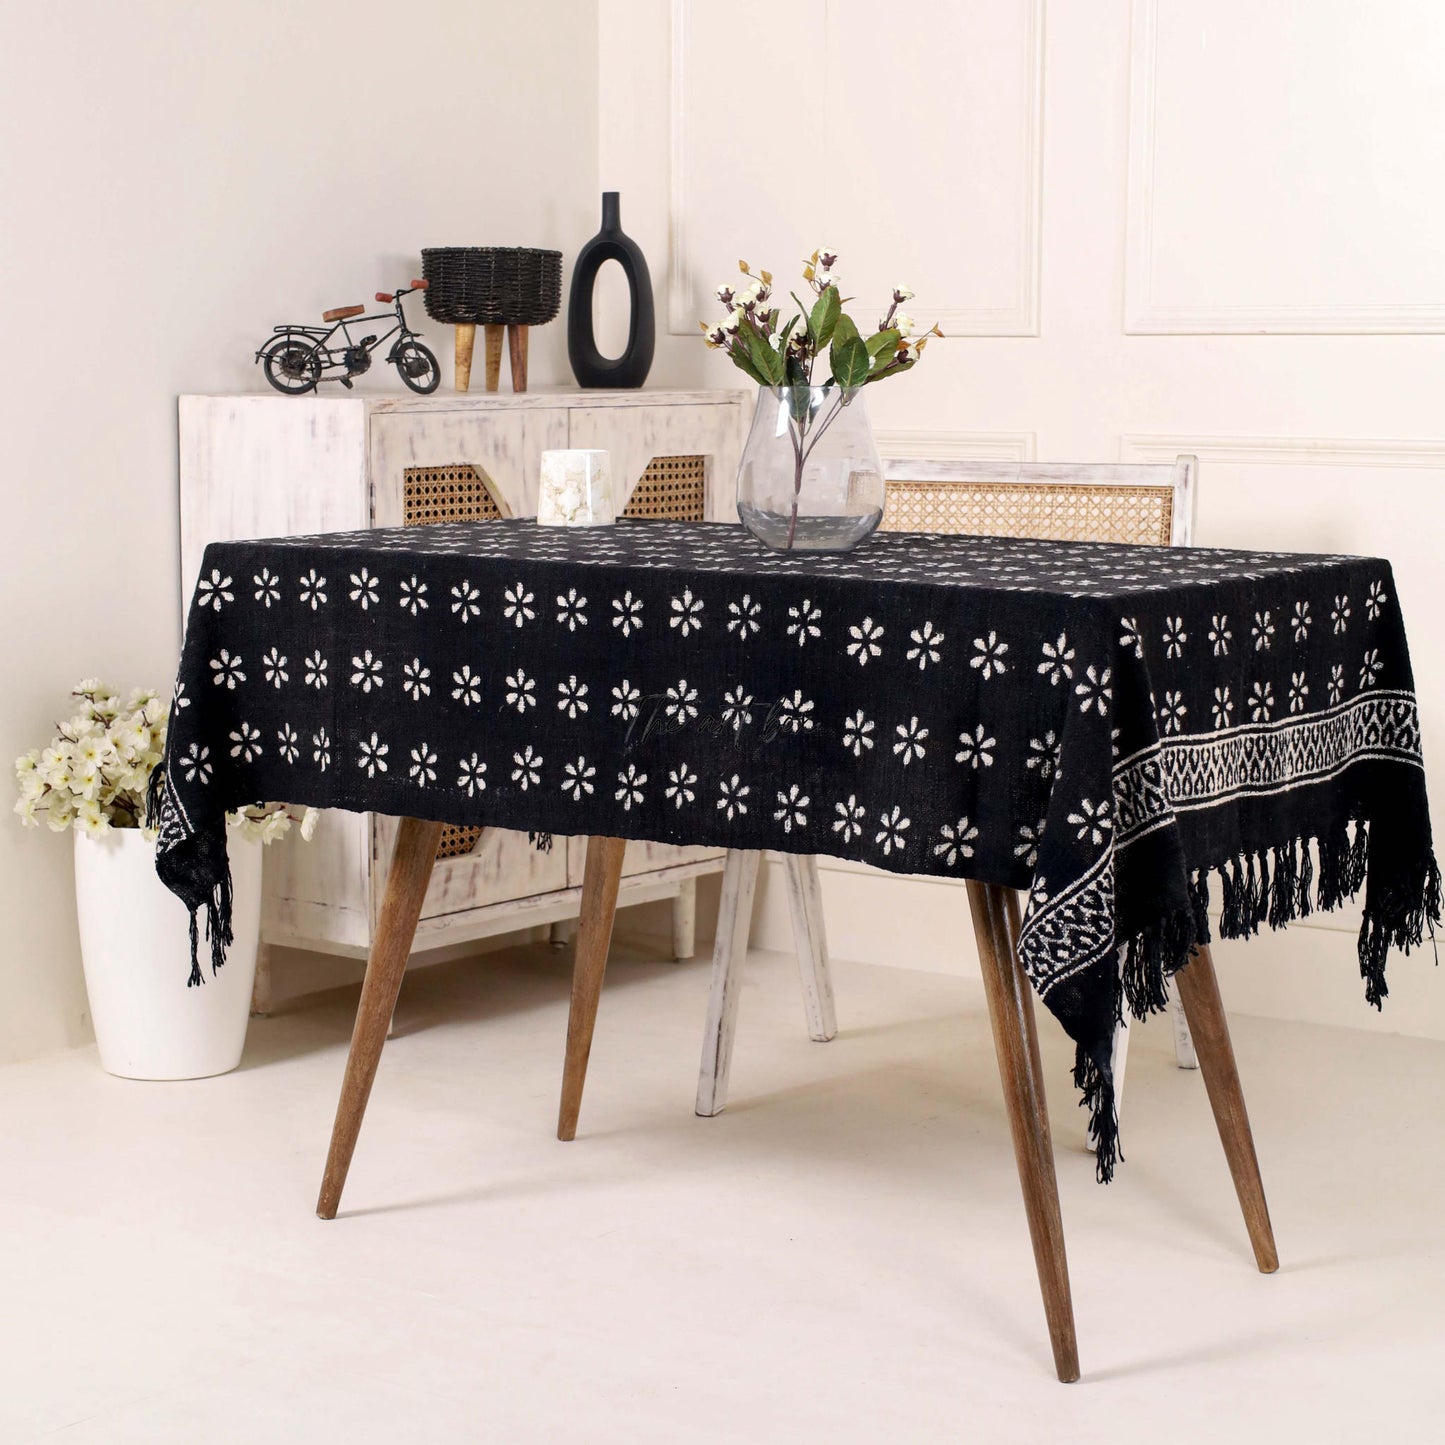 Black Floral Printed Table Cover